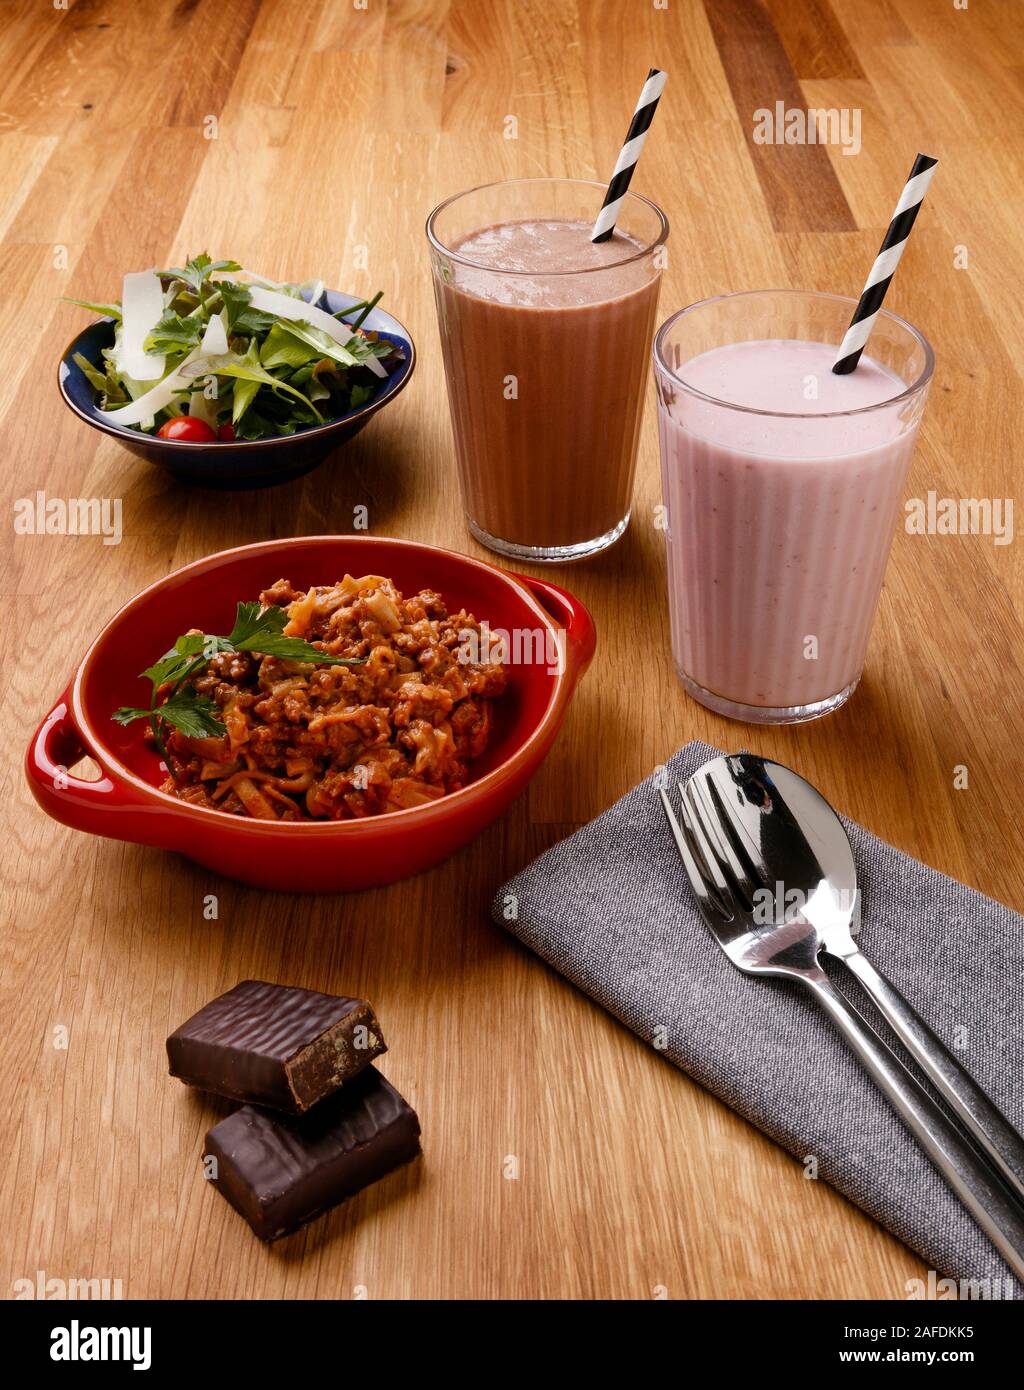 Calorie controlled daily meal plan, including breakfast milkshake, a snack and evening meal, shot on a wooden background Stock Photo